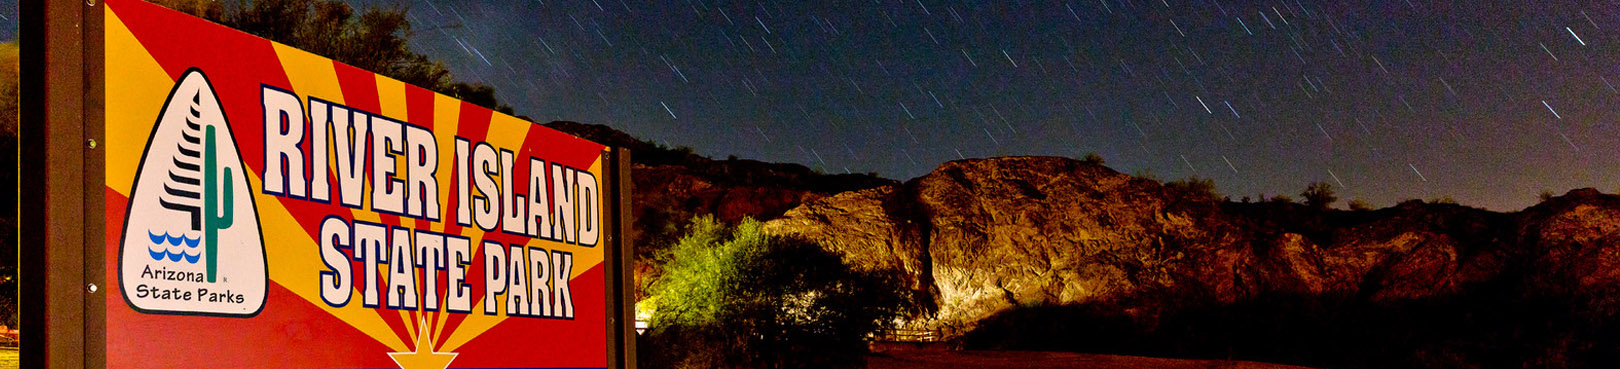 An illuminated River Island State Park sign and rugged desert mountains below a starry night.